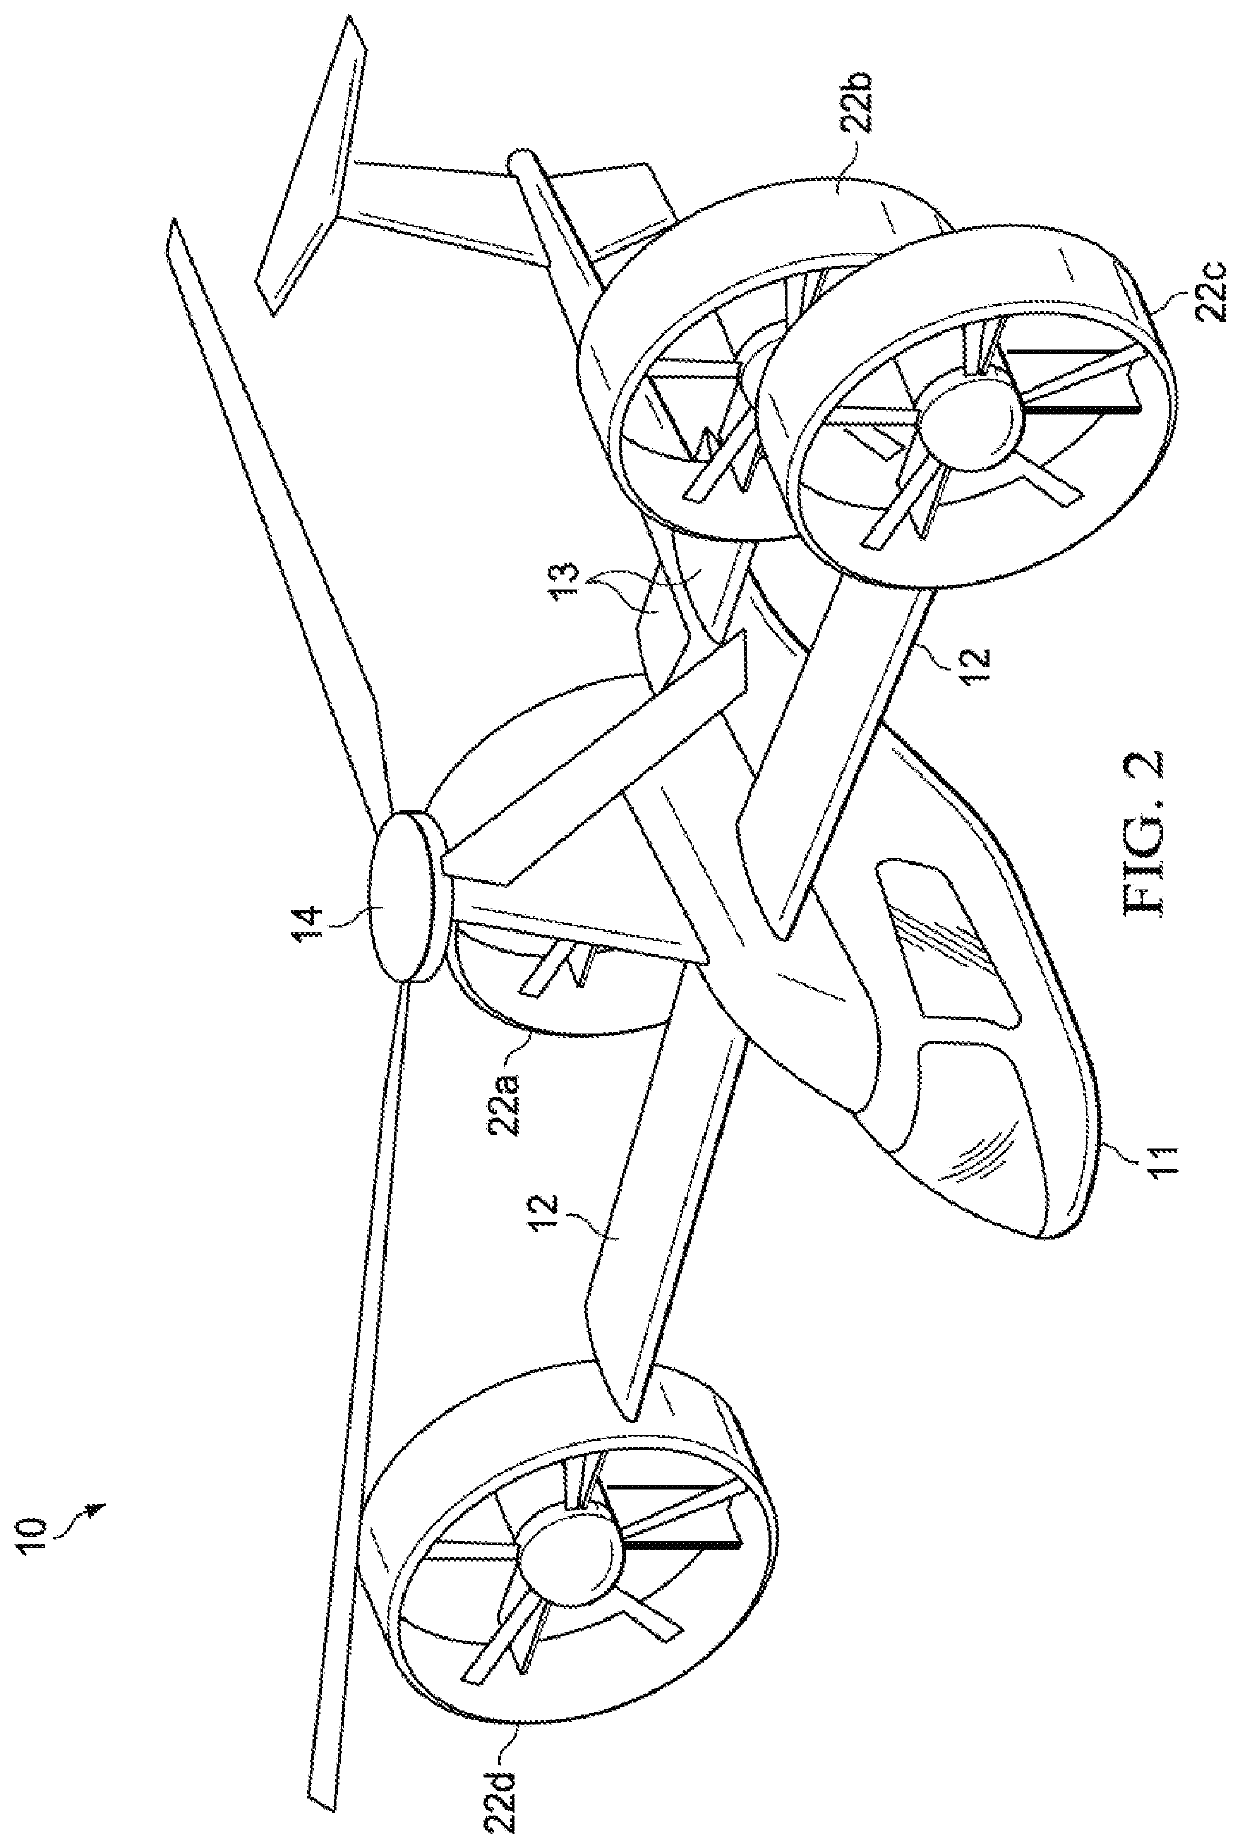 Tilting duct compound helicopter